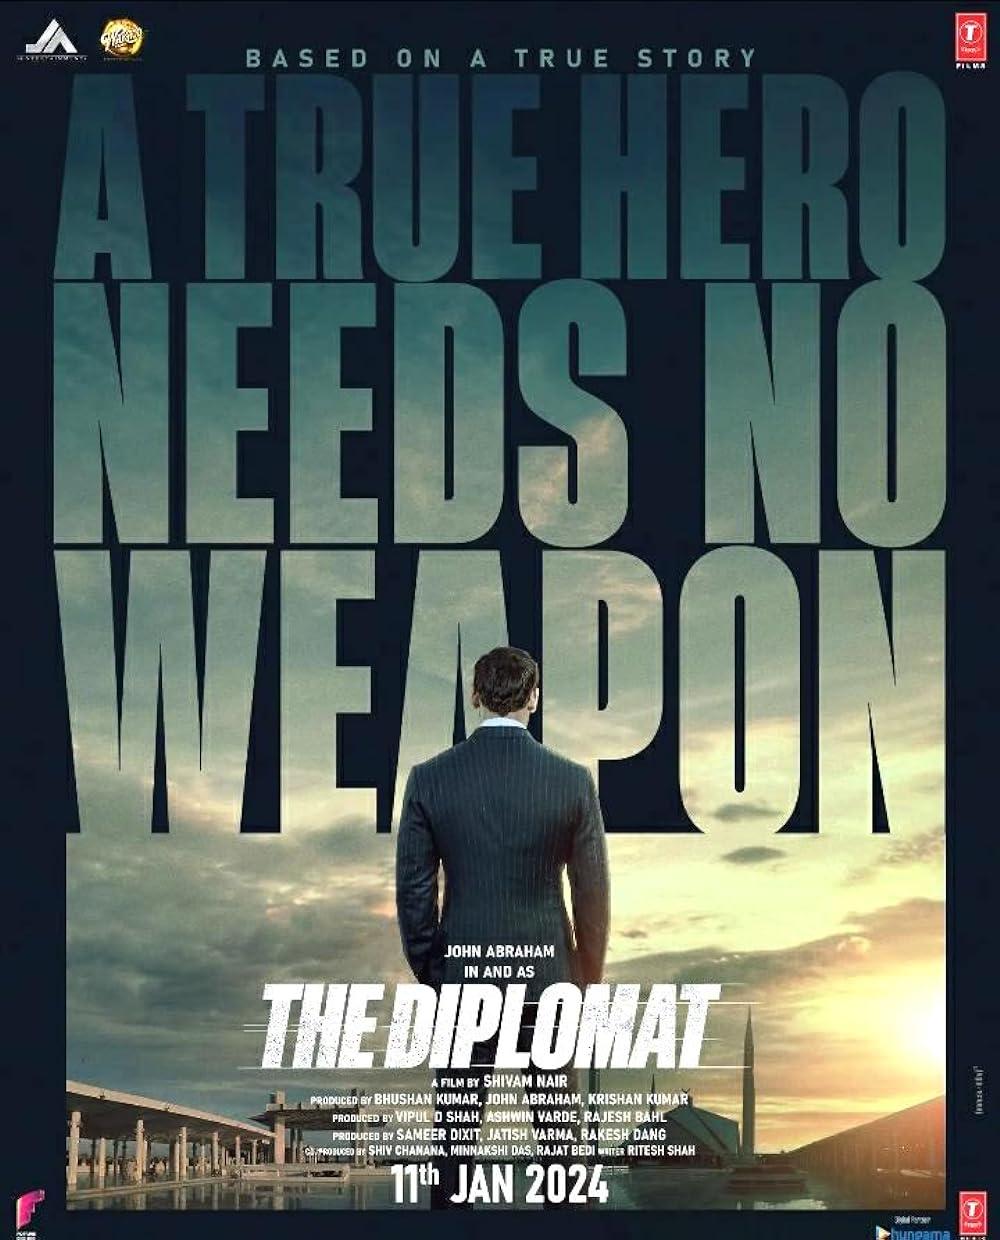 The DiplomatDirected by Shivam Nair, 'The Diplomat' is touted to be based on a true story, featuring John Abraham in an intriguing narrative that promises to captivate audiences.